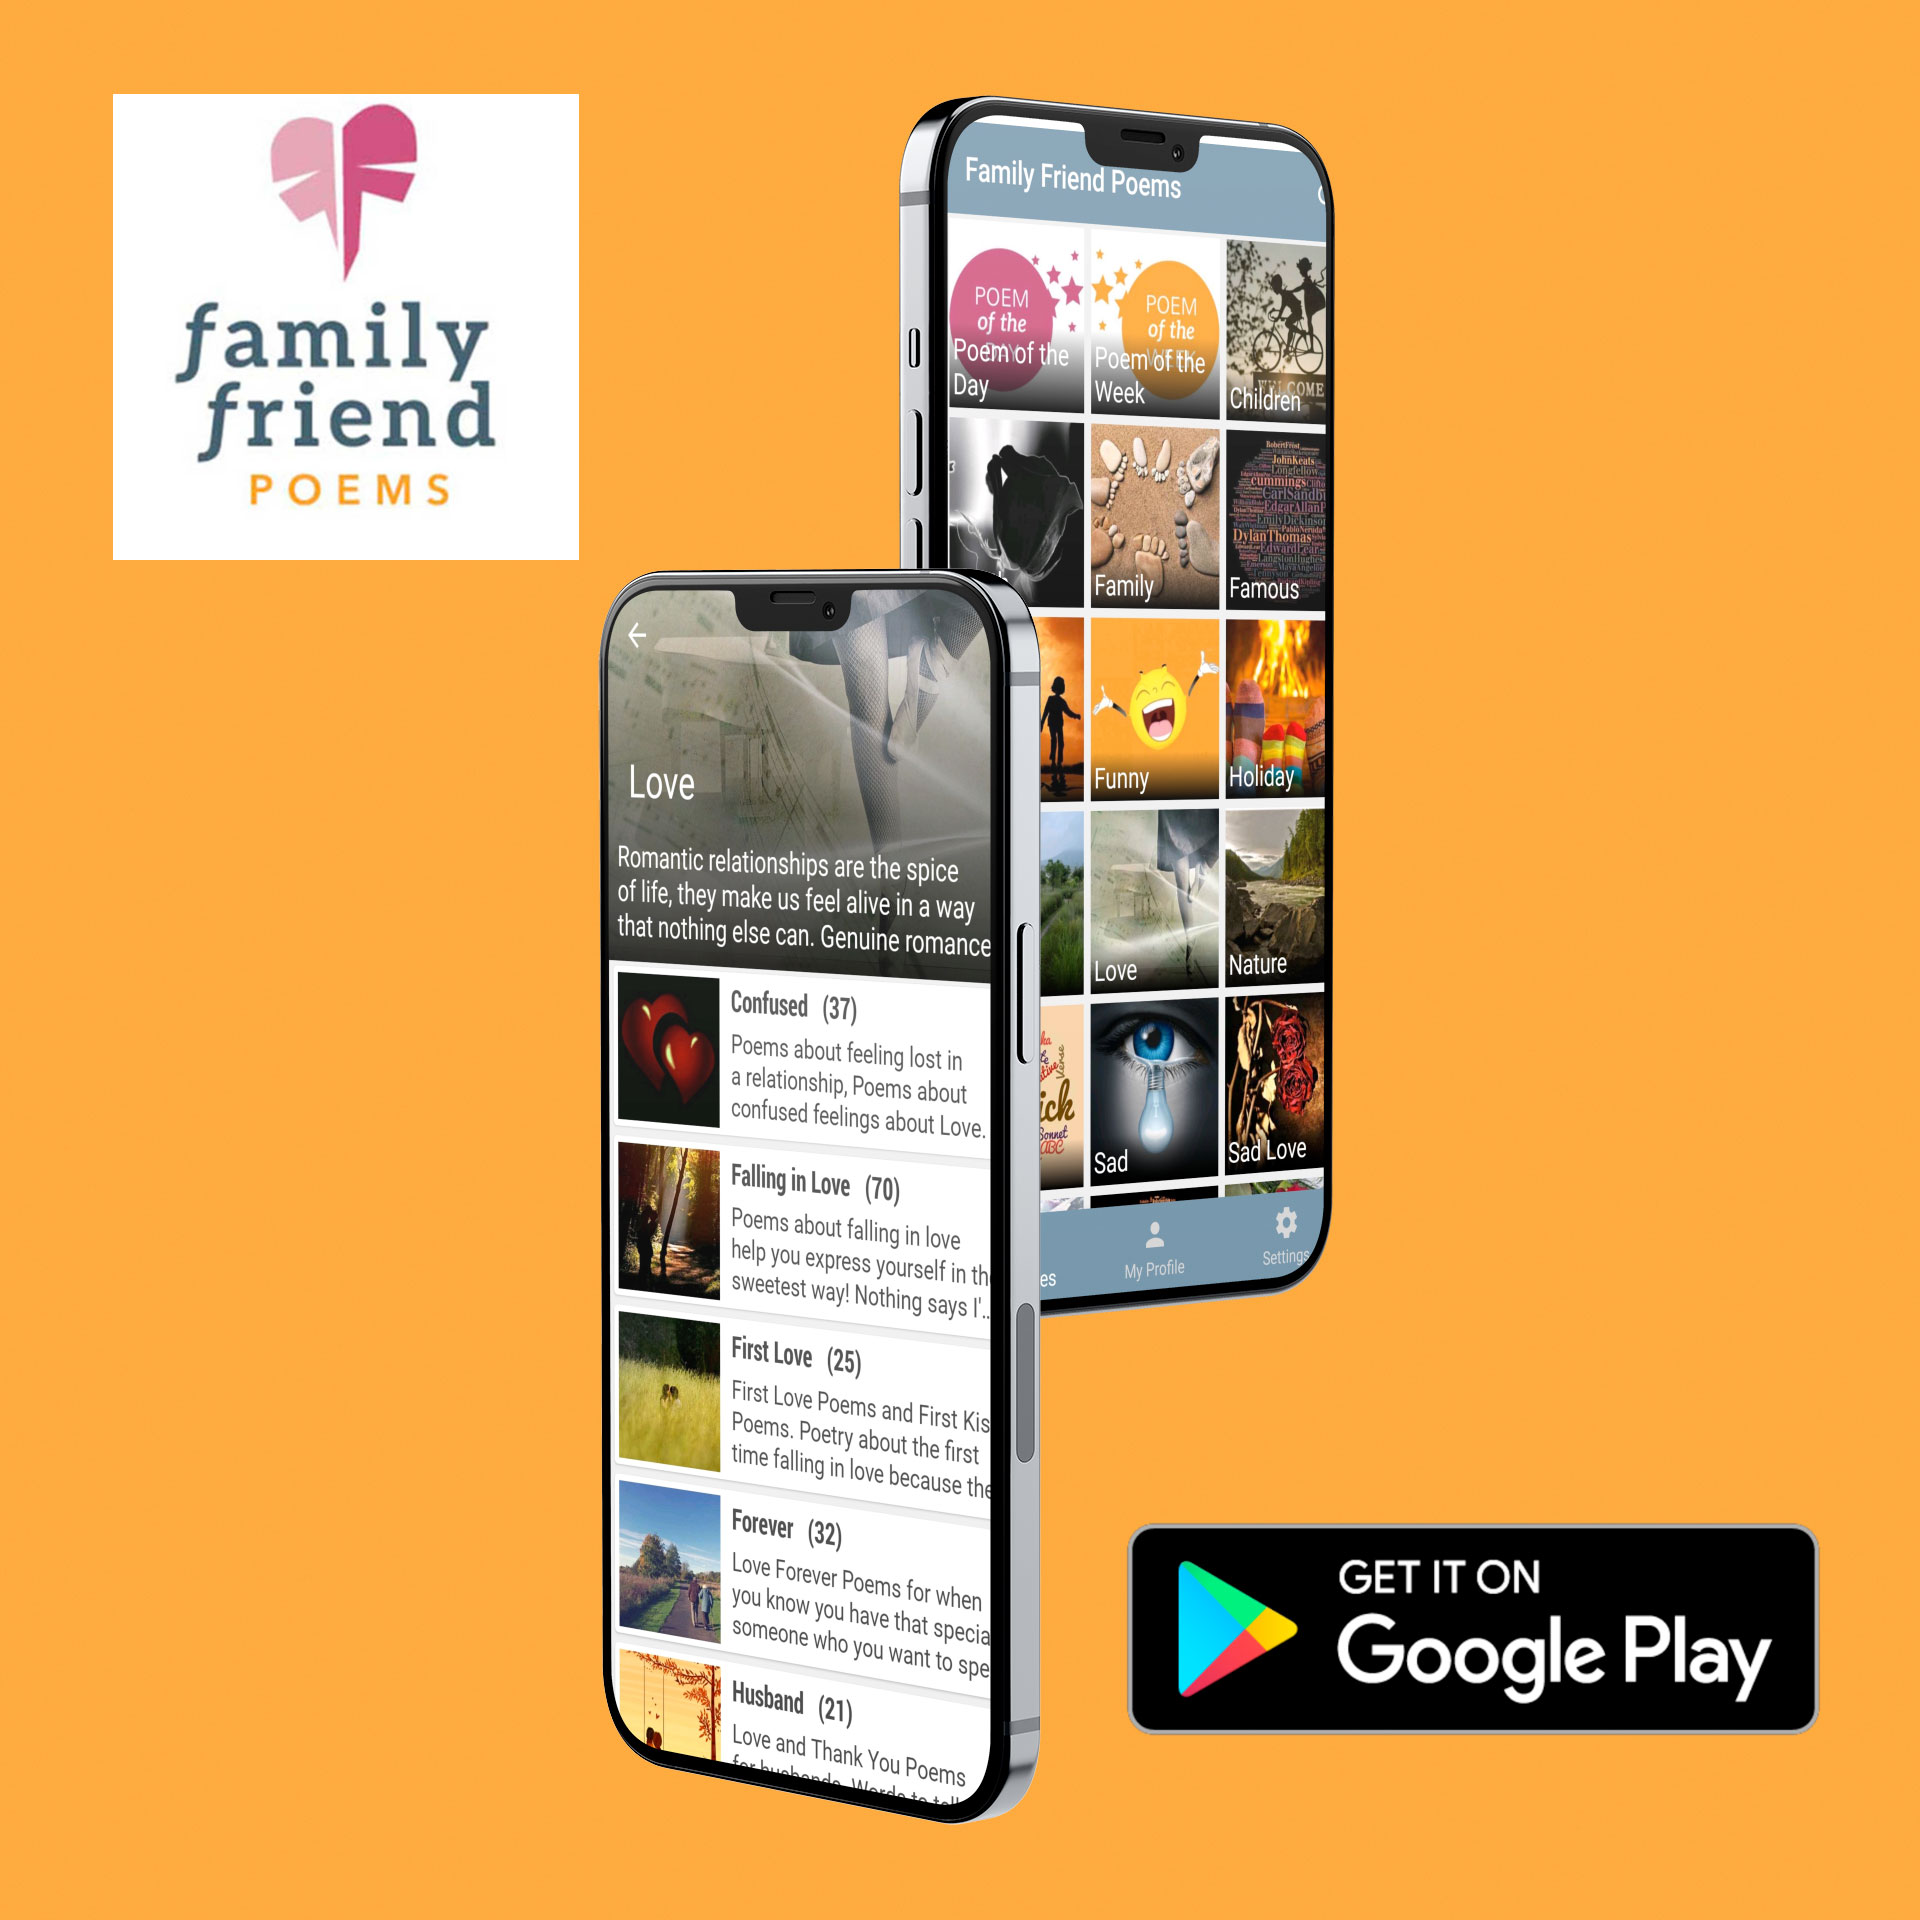 Family Friend Poems on Google Play